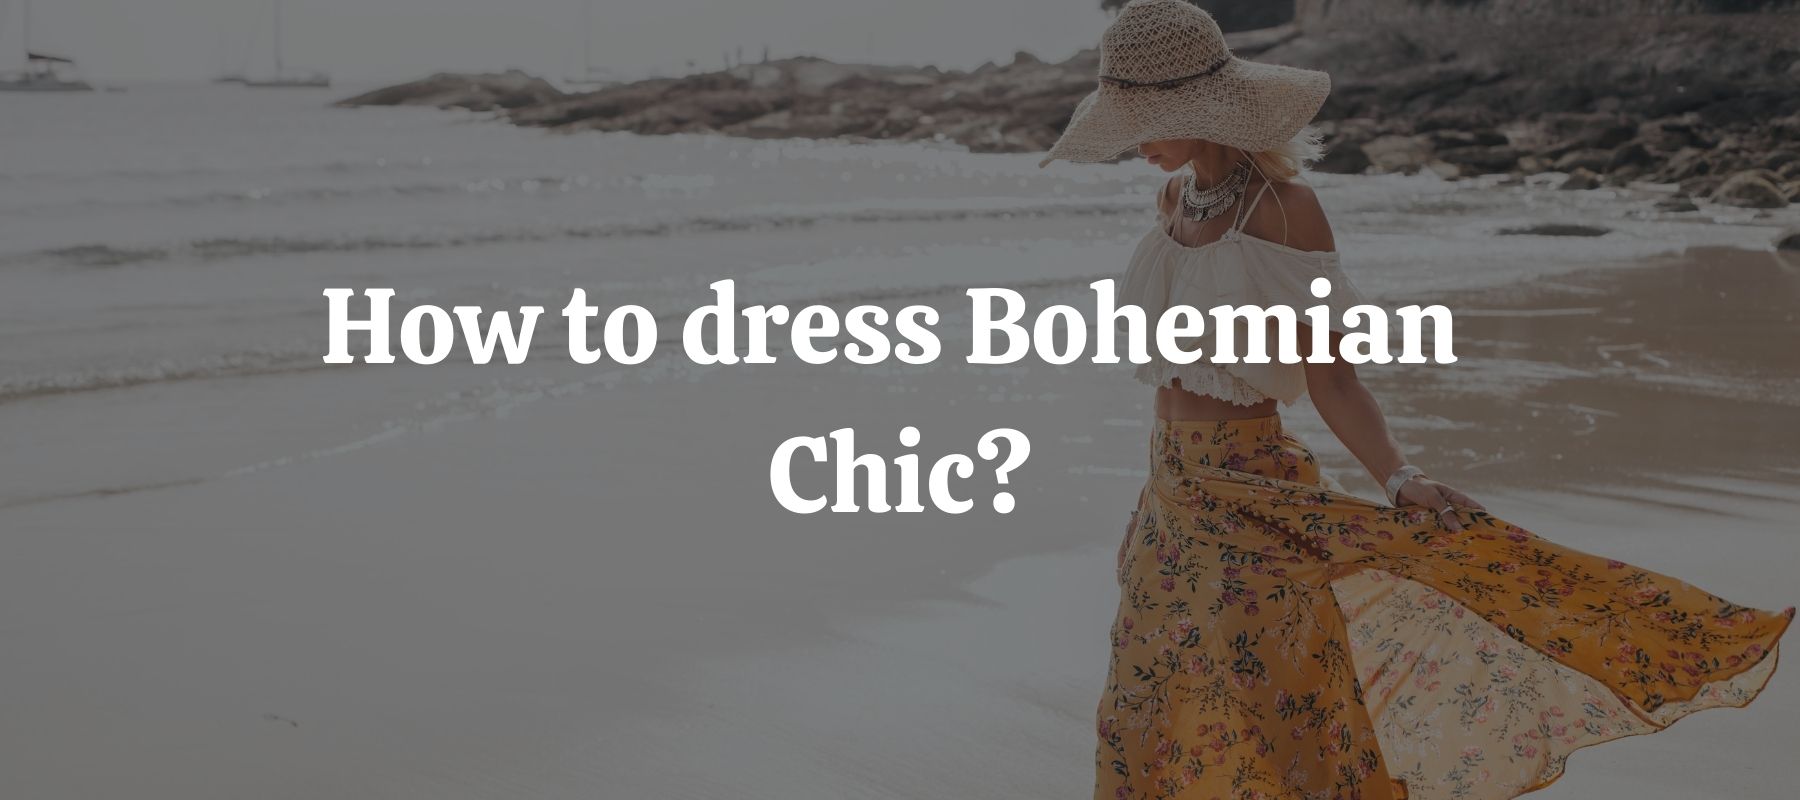 How to dress Bohemian Chic